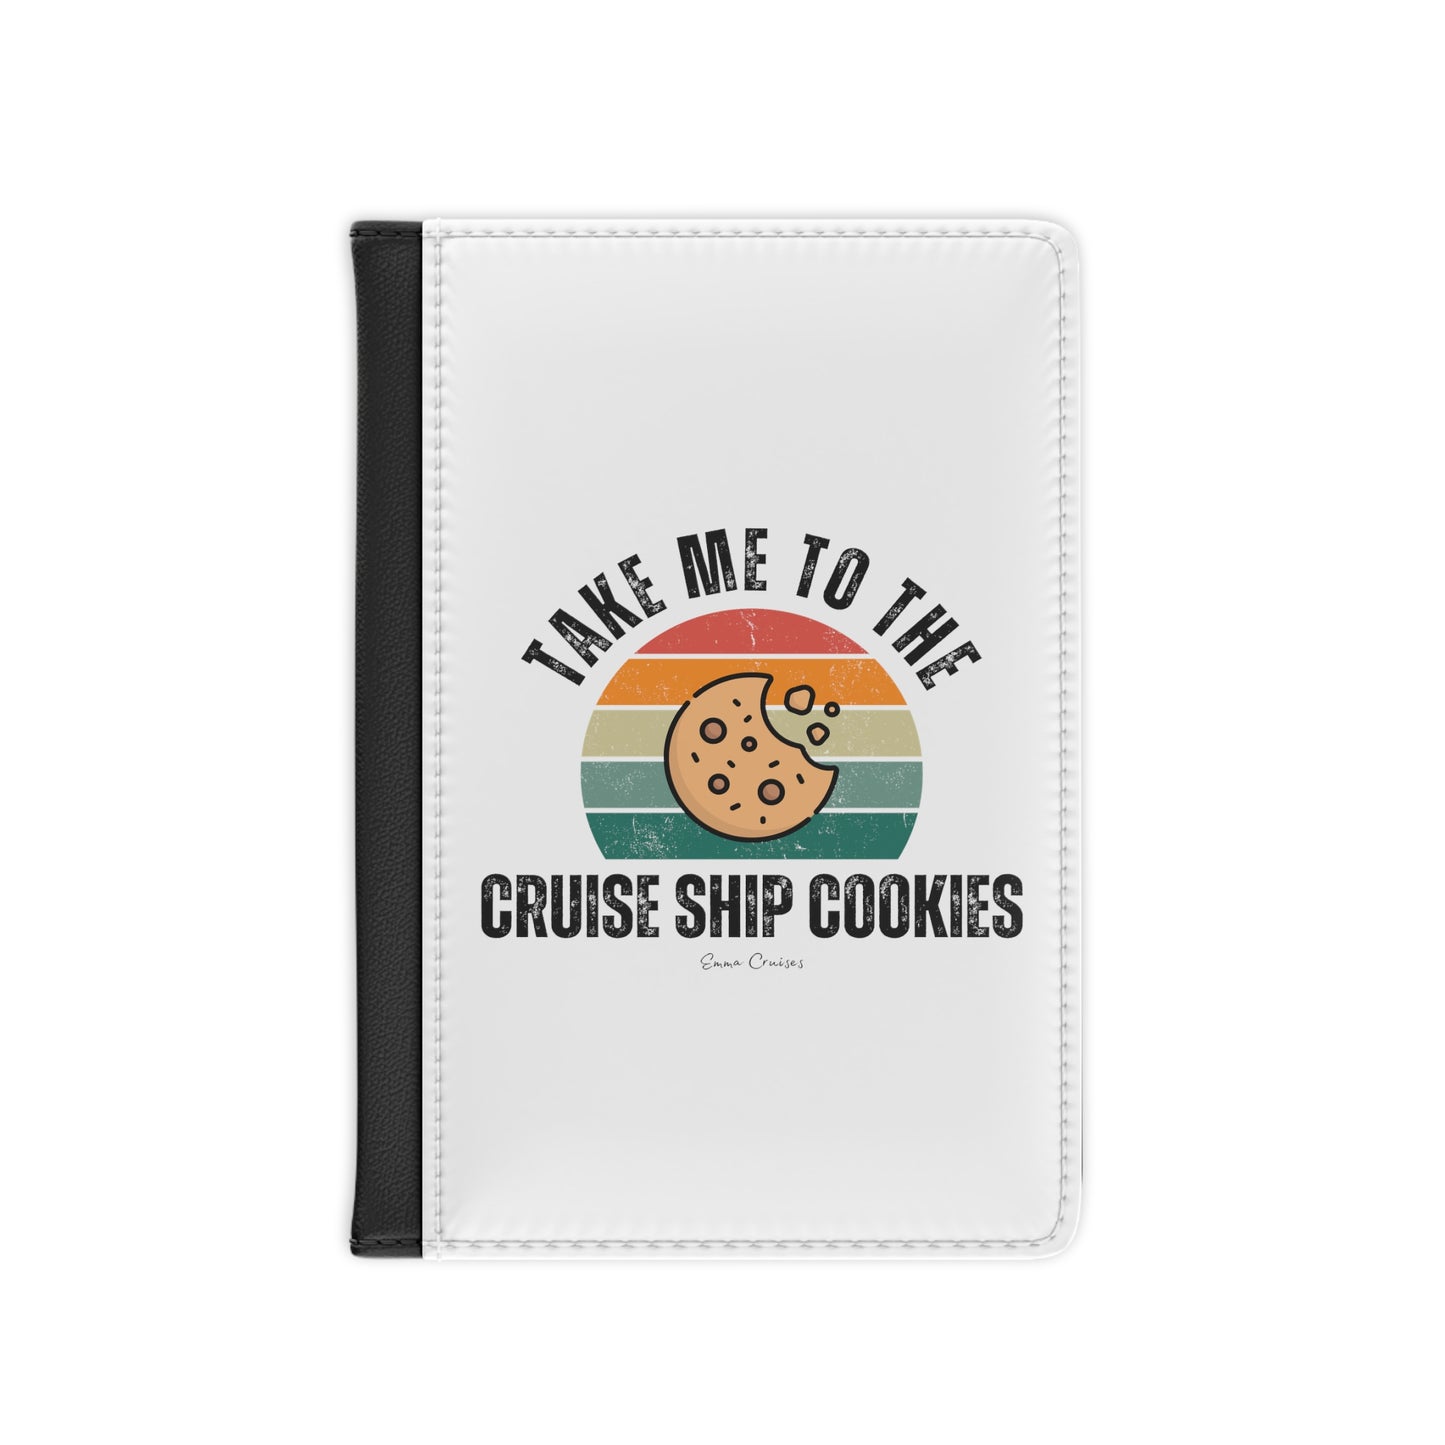 Take Me to the Cruise Ship Cookies - Passport Cover